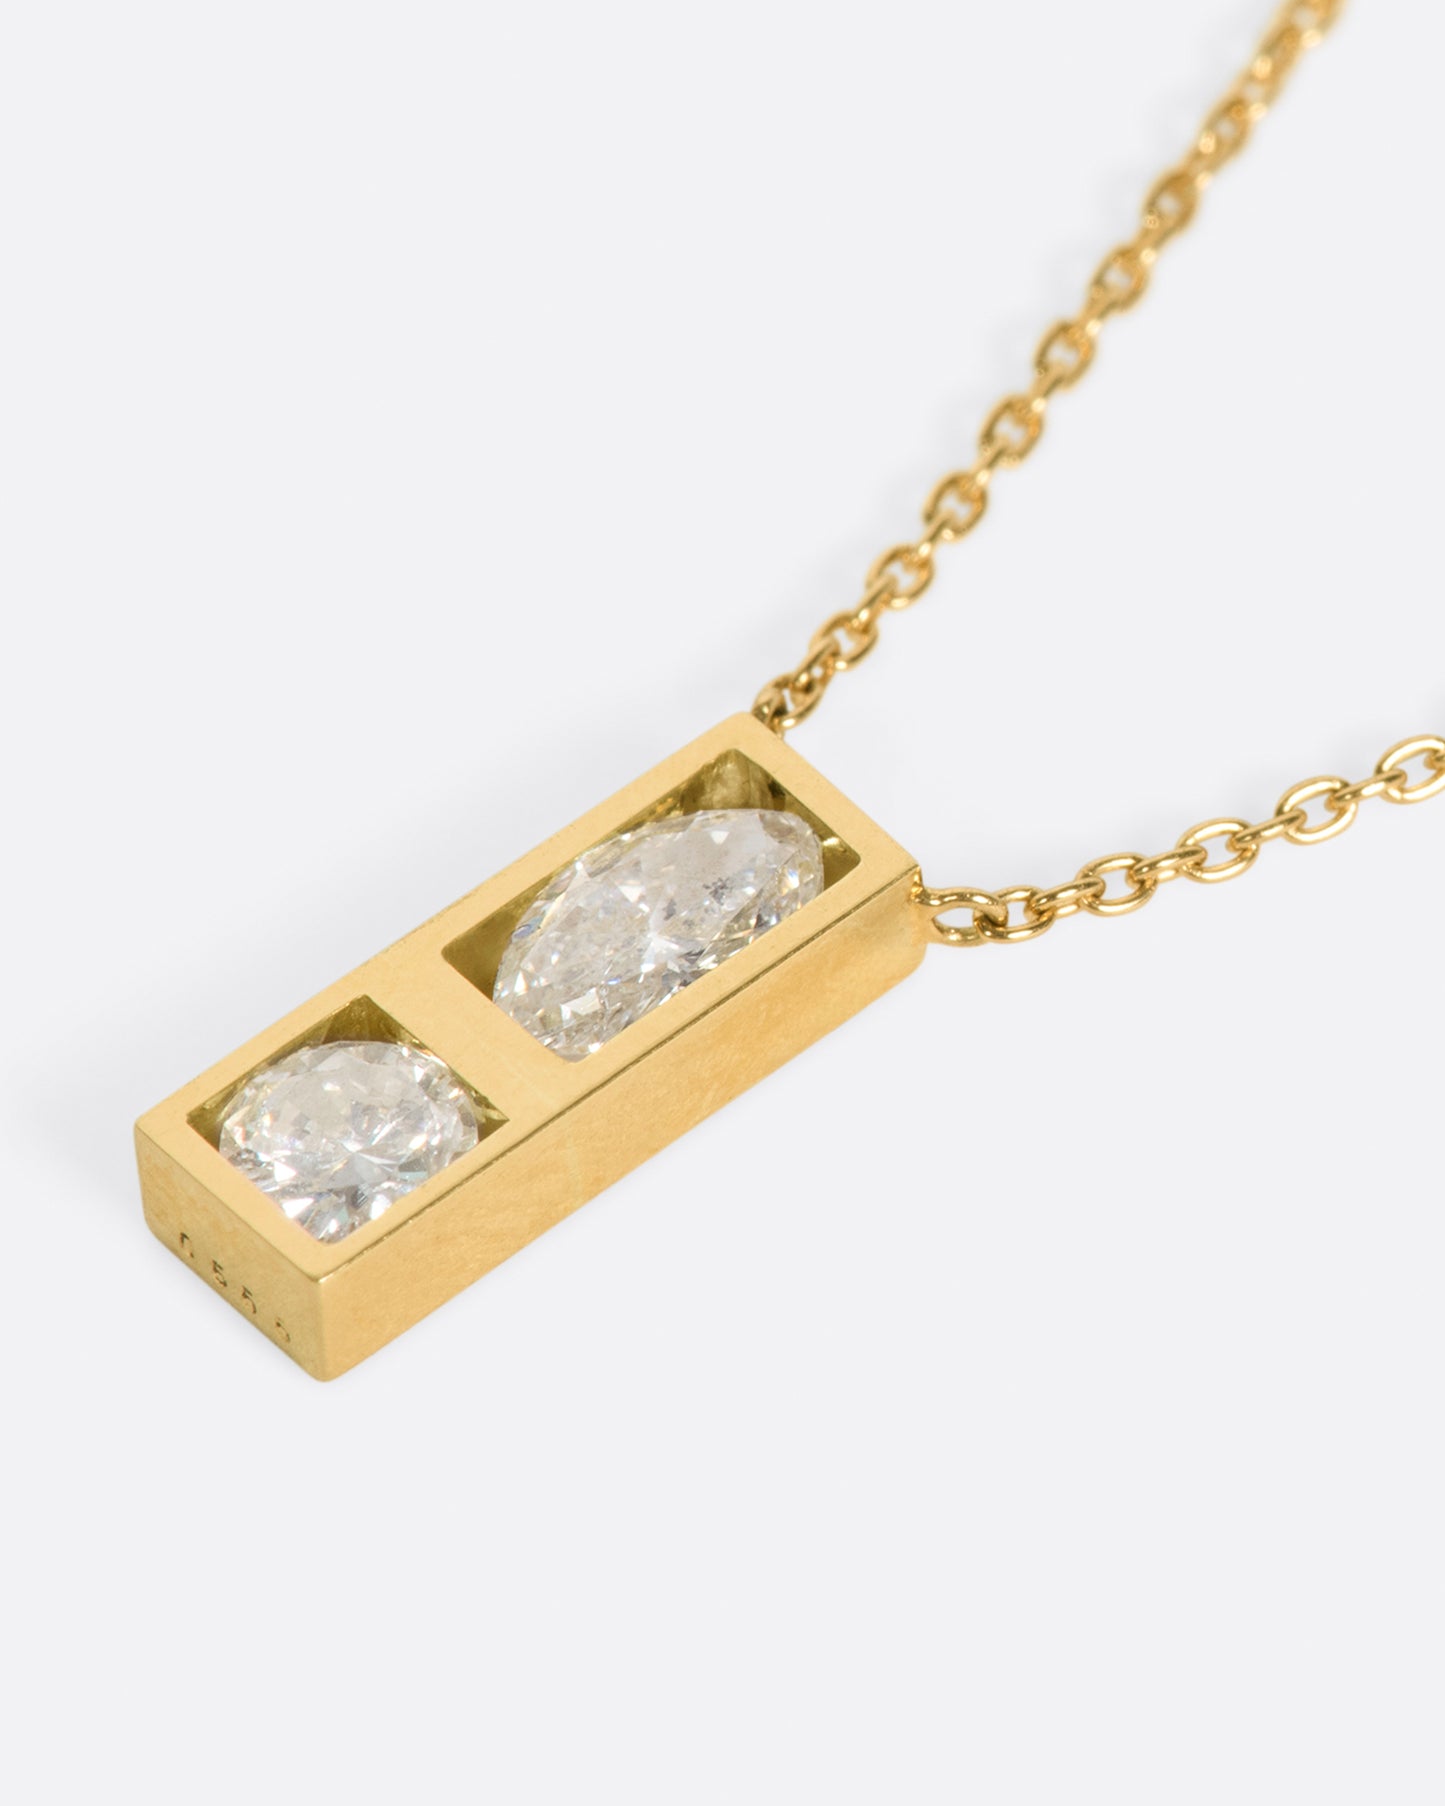 A geometric pendant necklace with two diamonds, shown laying flat.